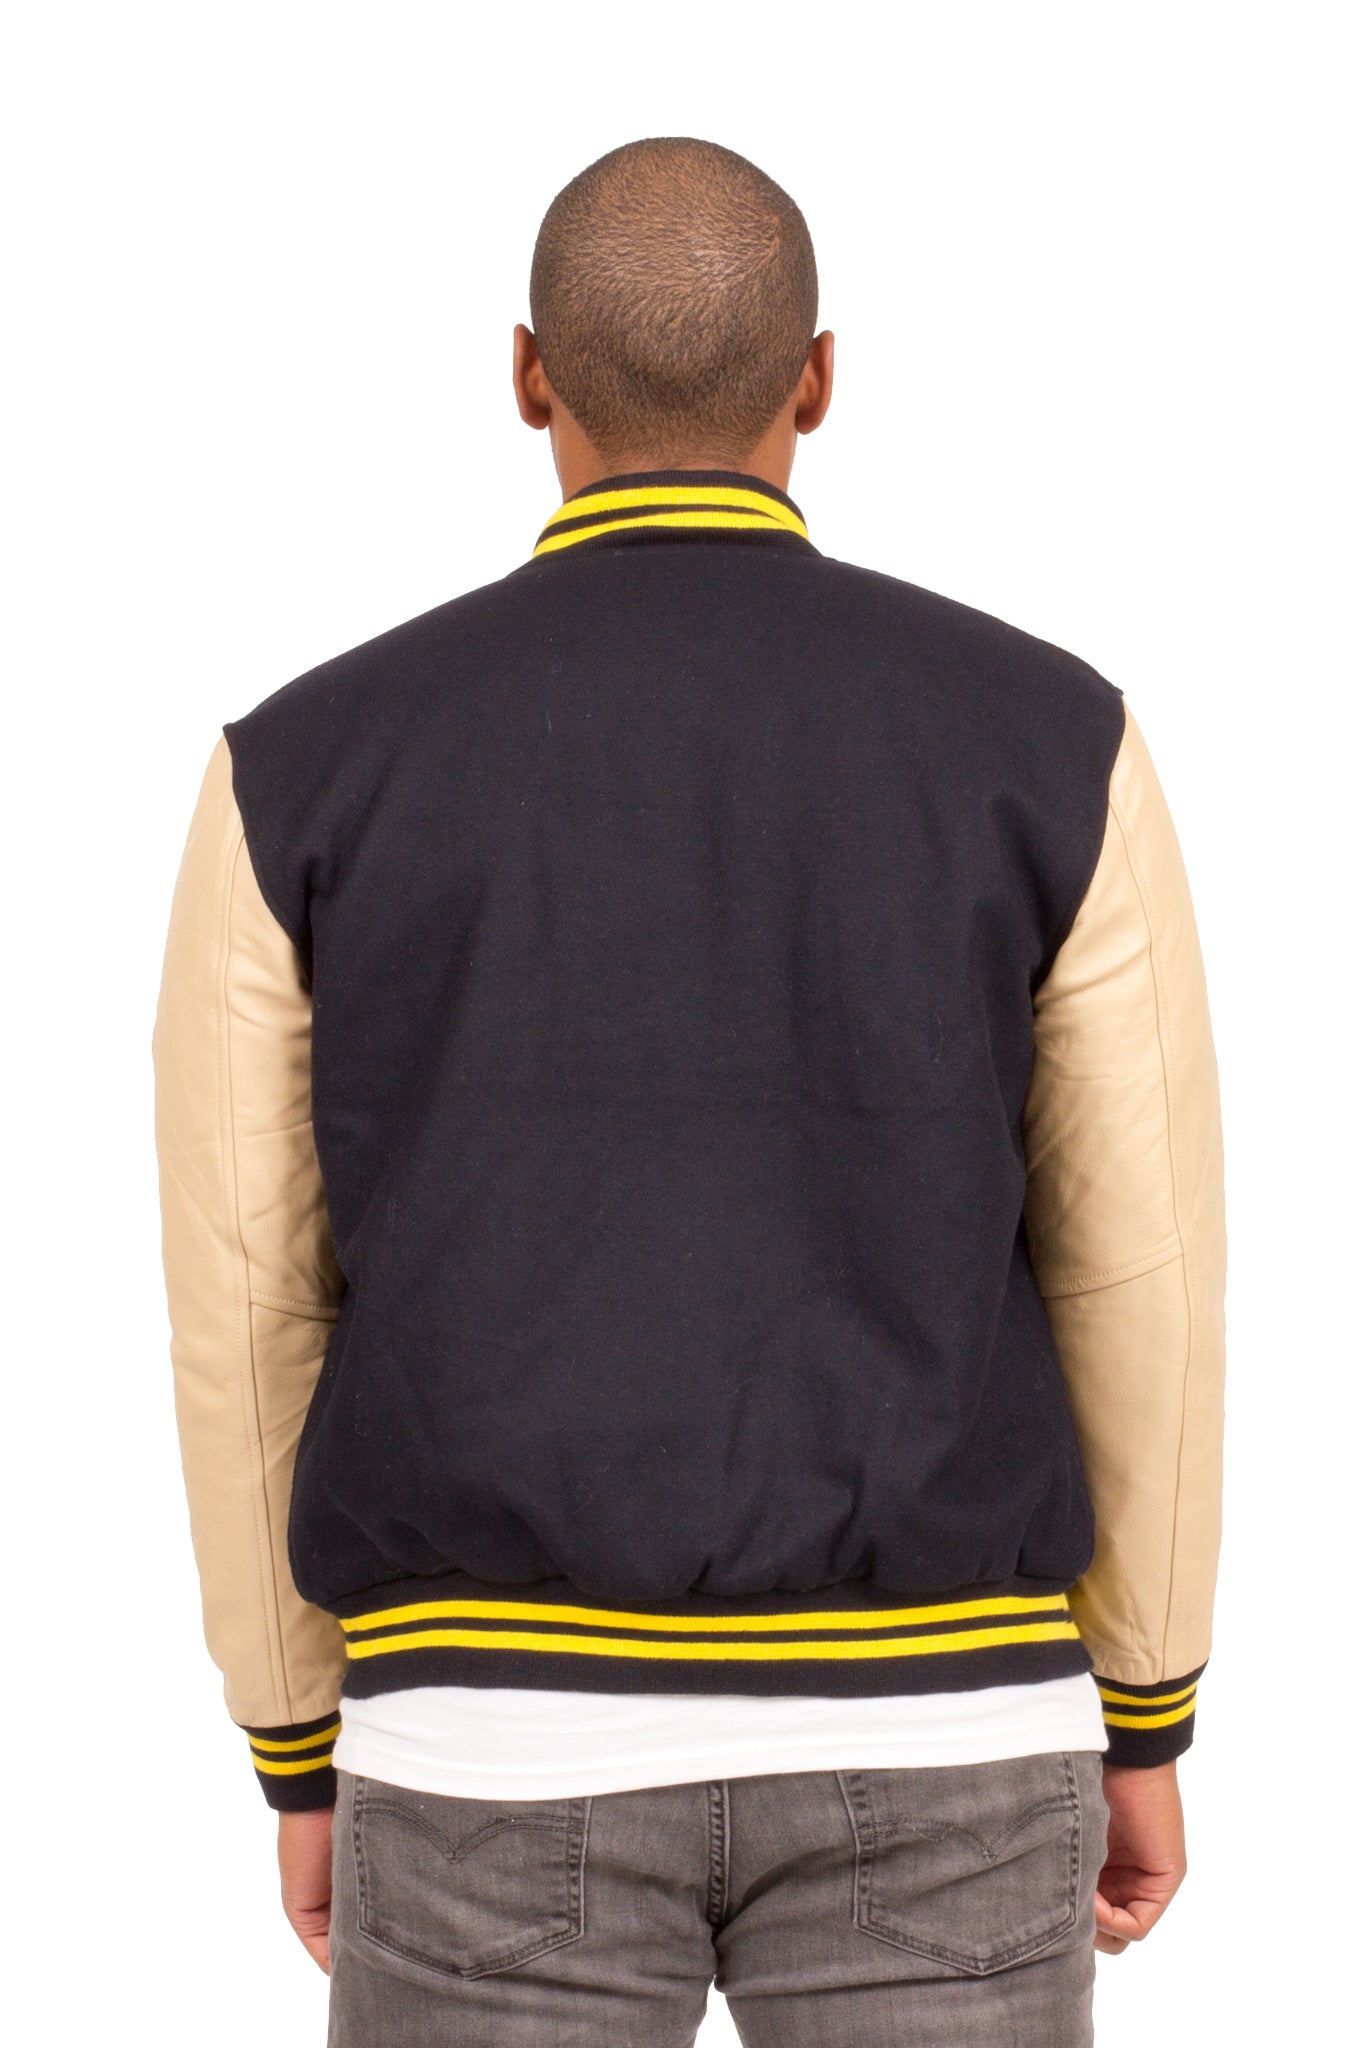 ALL CITY VARSITY JACKET IN NAVY BLUE | Poor Little Rich Boy Clothing